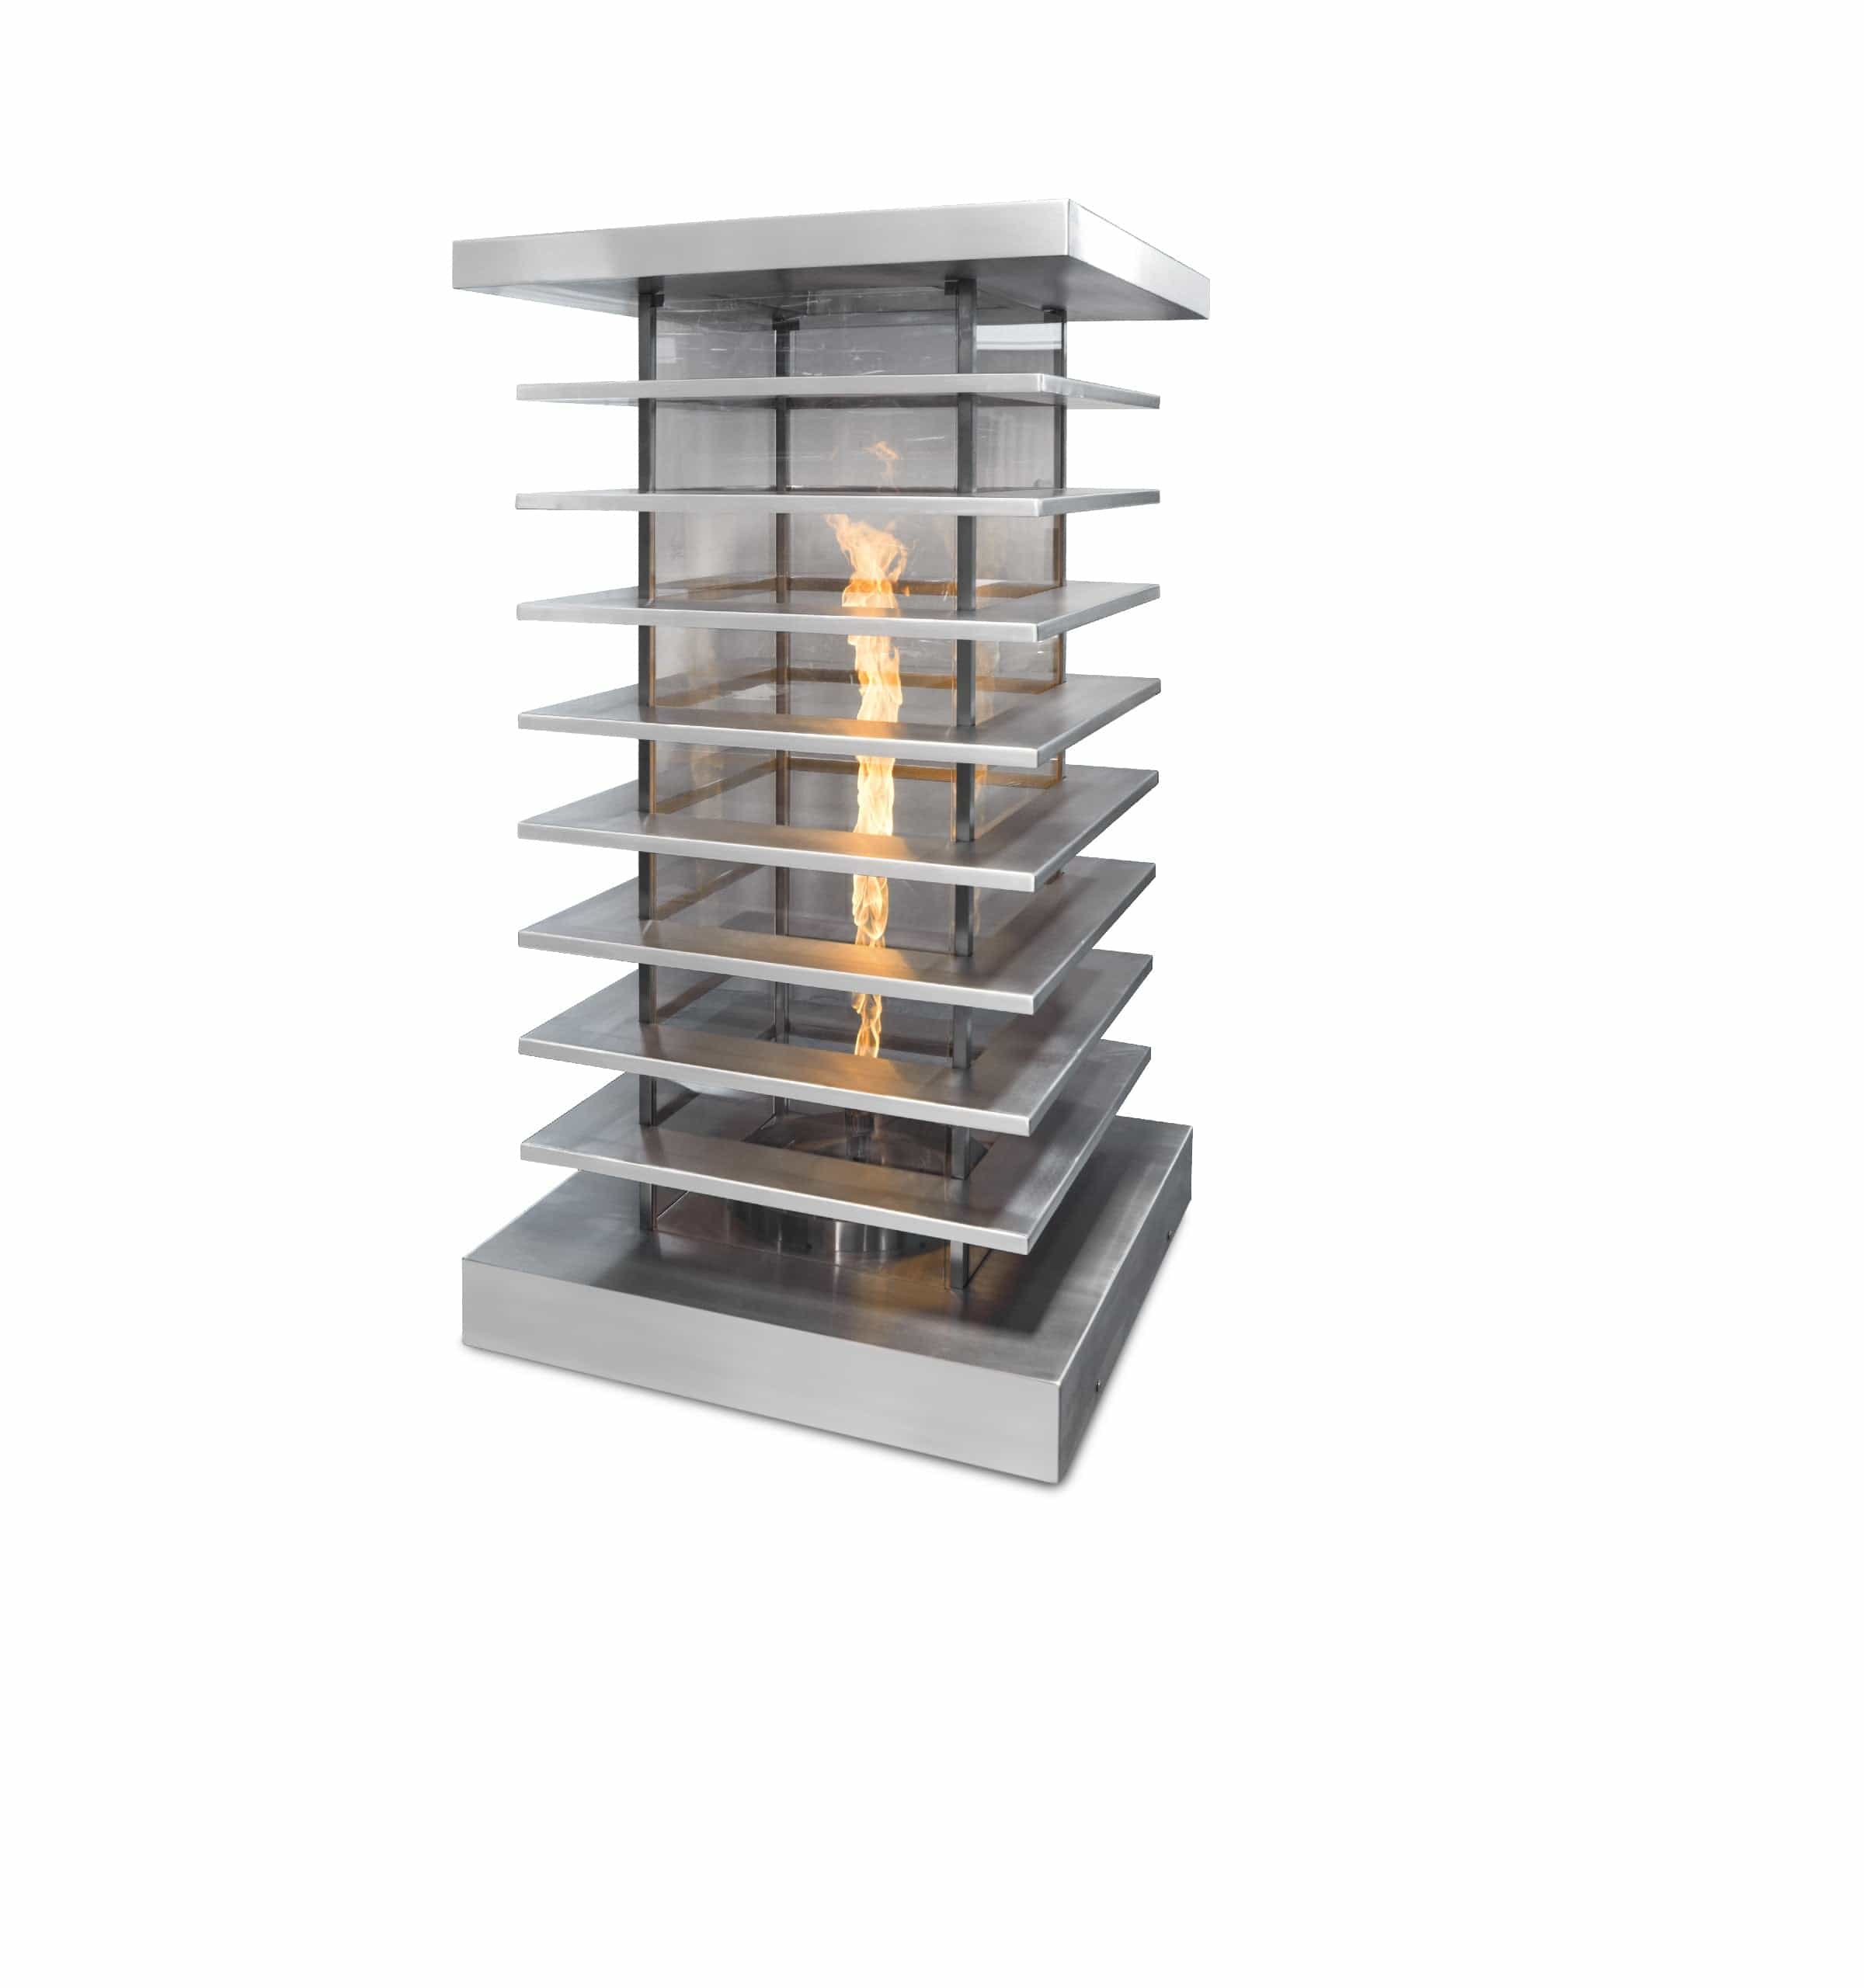 The Outdoor Plus Fire Tower 28" x 28" / Match Lit The Outdoor Plus High Rise Fire Tower | Stainless Steel OPT-FTWR528